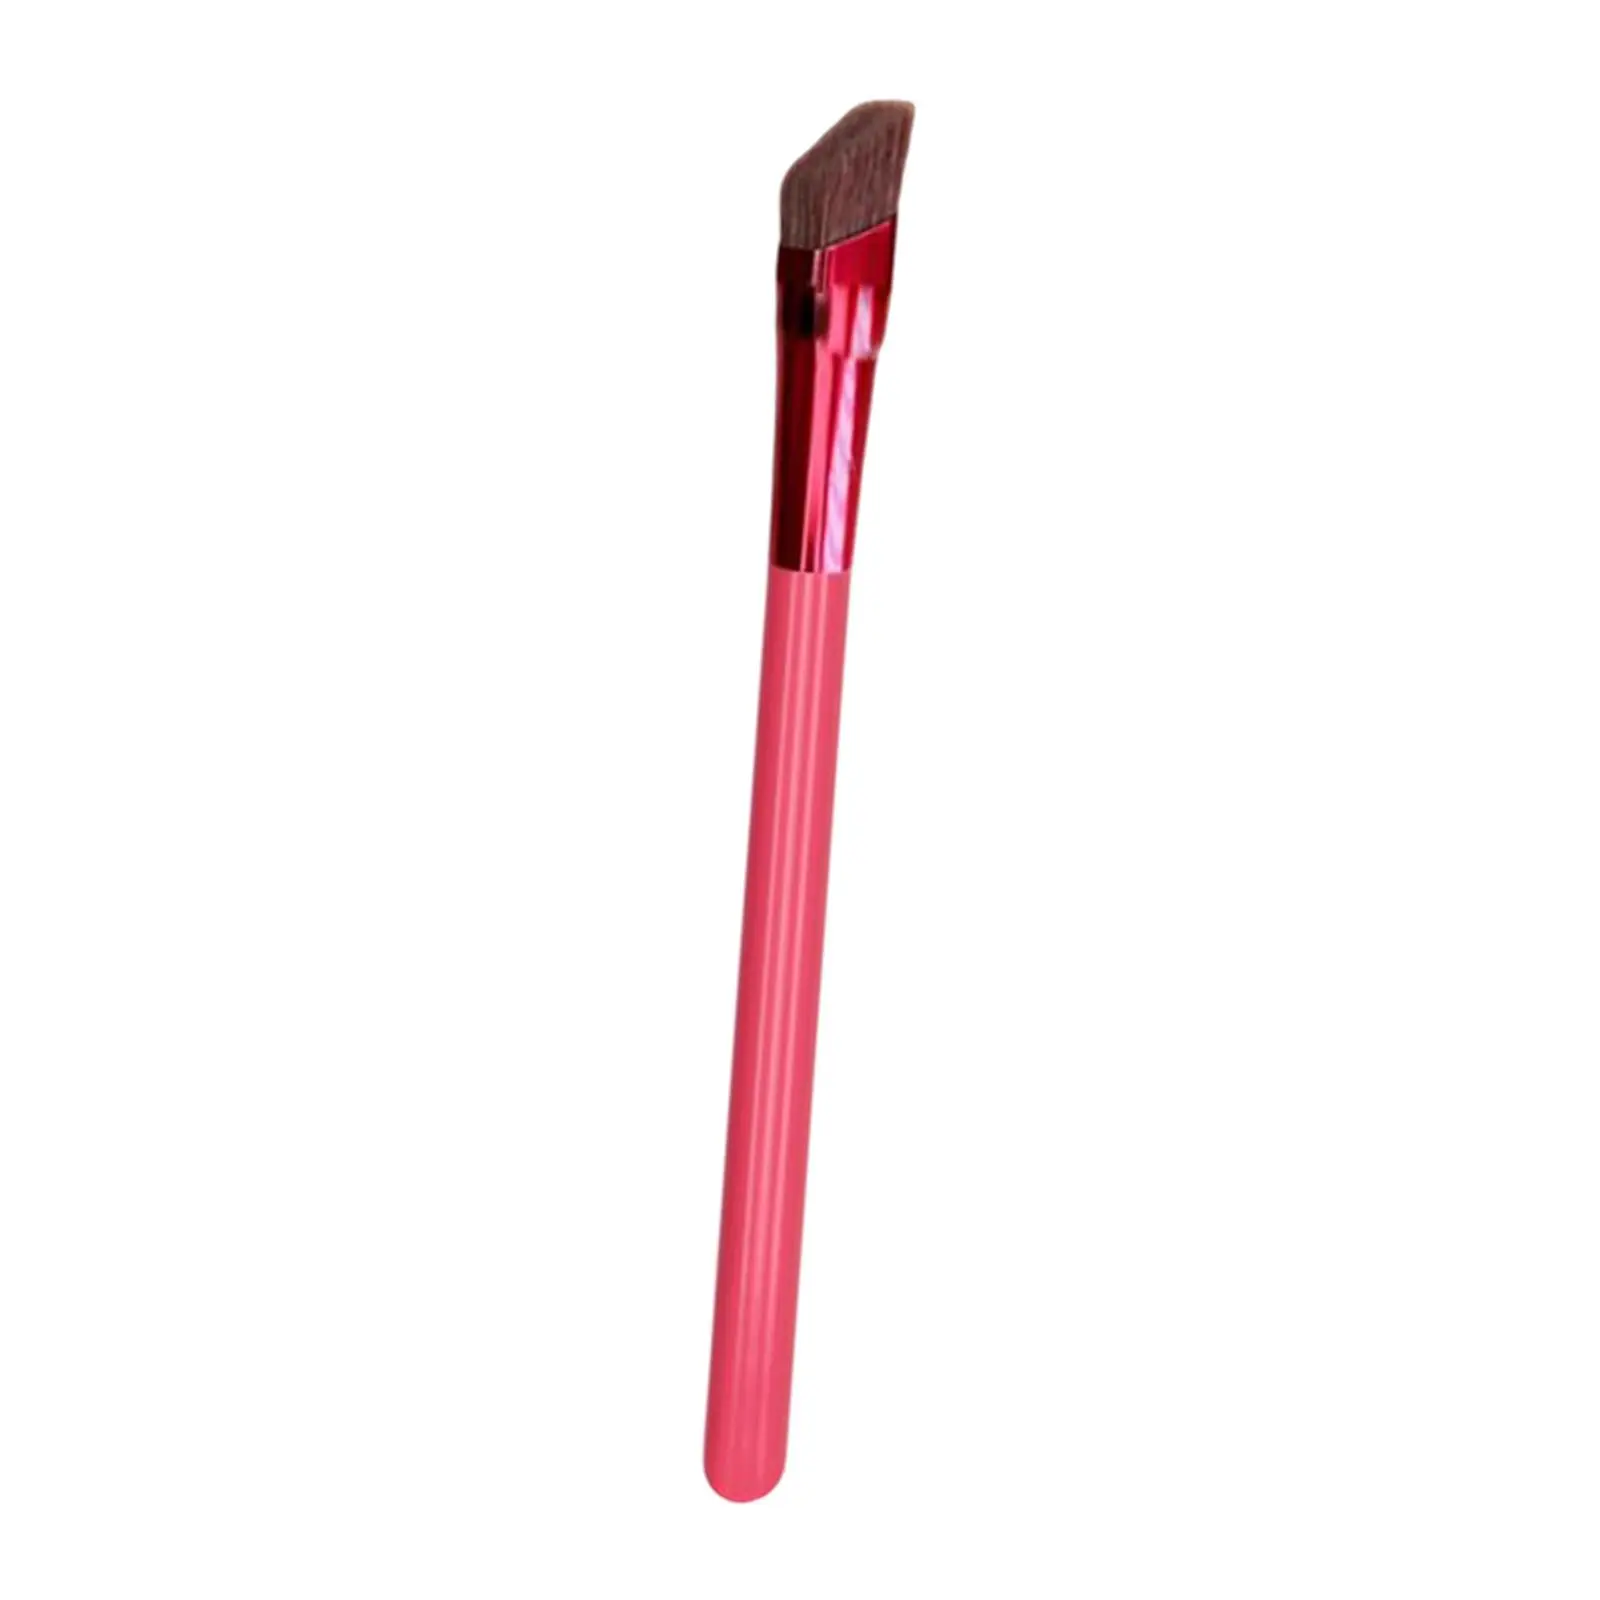 Multi Function Eyebrow Brush Square Three dimensional Home Salon Use Professional Makeup Brush for Contour Eye Brow Girls